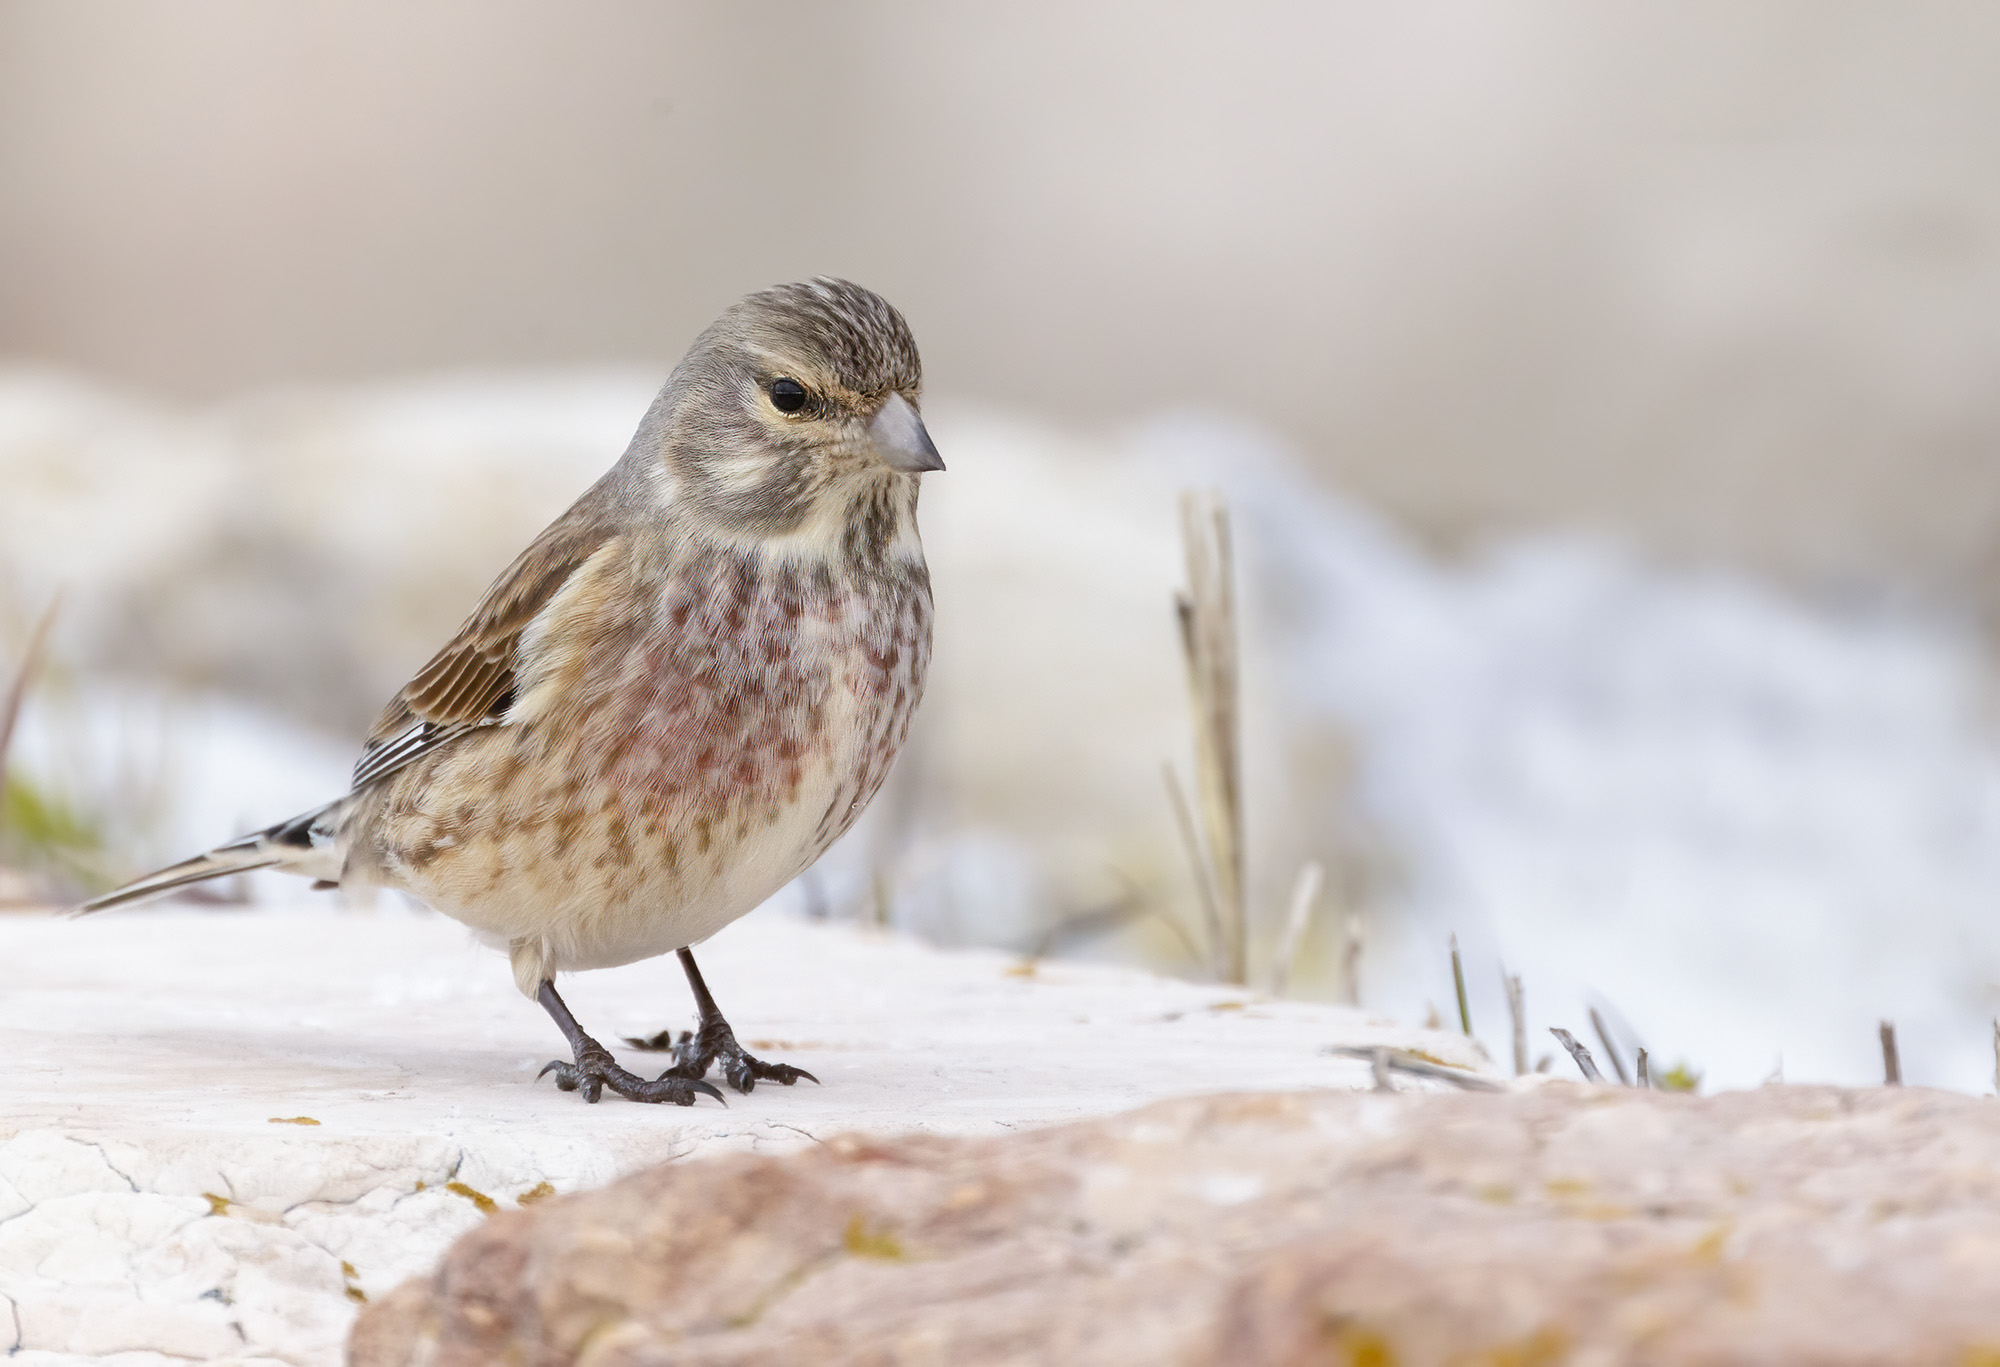 The linnet (male) and the snow...